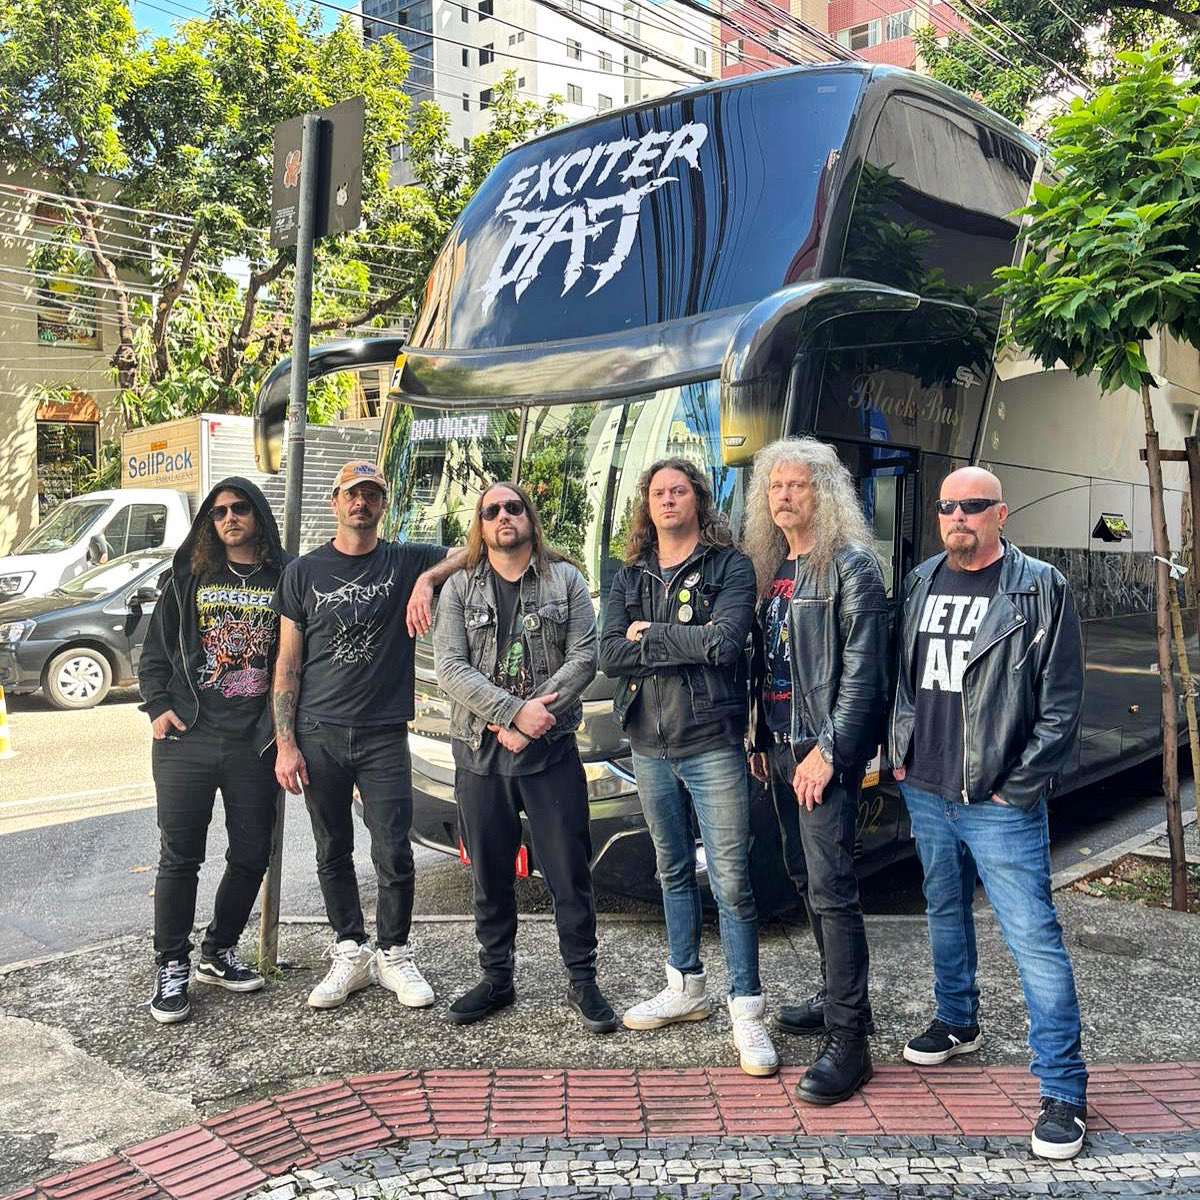 THE EXCITER & BAT ATTACK TAKES BRAZIL 🇧🇷 The bus has pulled into Belo Horizonte and we rock Caverna Rock Pub tonite. See you maniacs in the pit! APRIL 4 - BELO HORIZONTE APRIL 5 - BRASILIA DF APRIL 6 - SÃO PAULO - SOLD OUT!